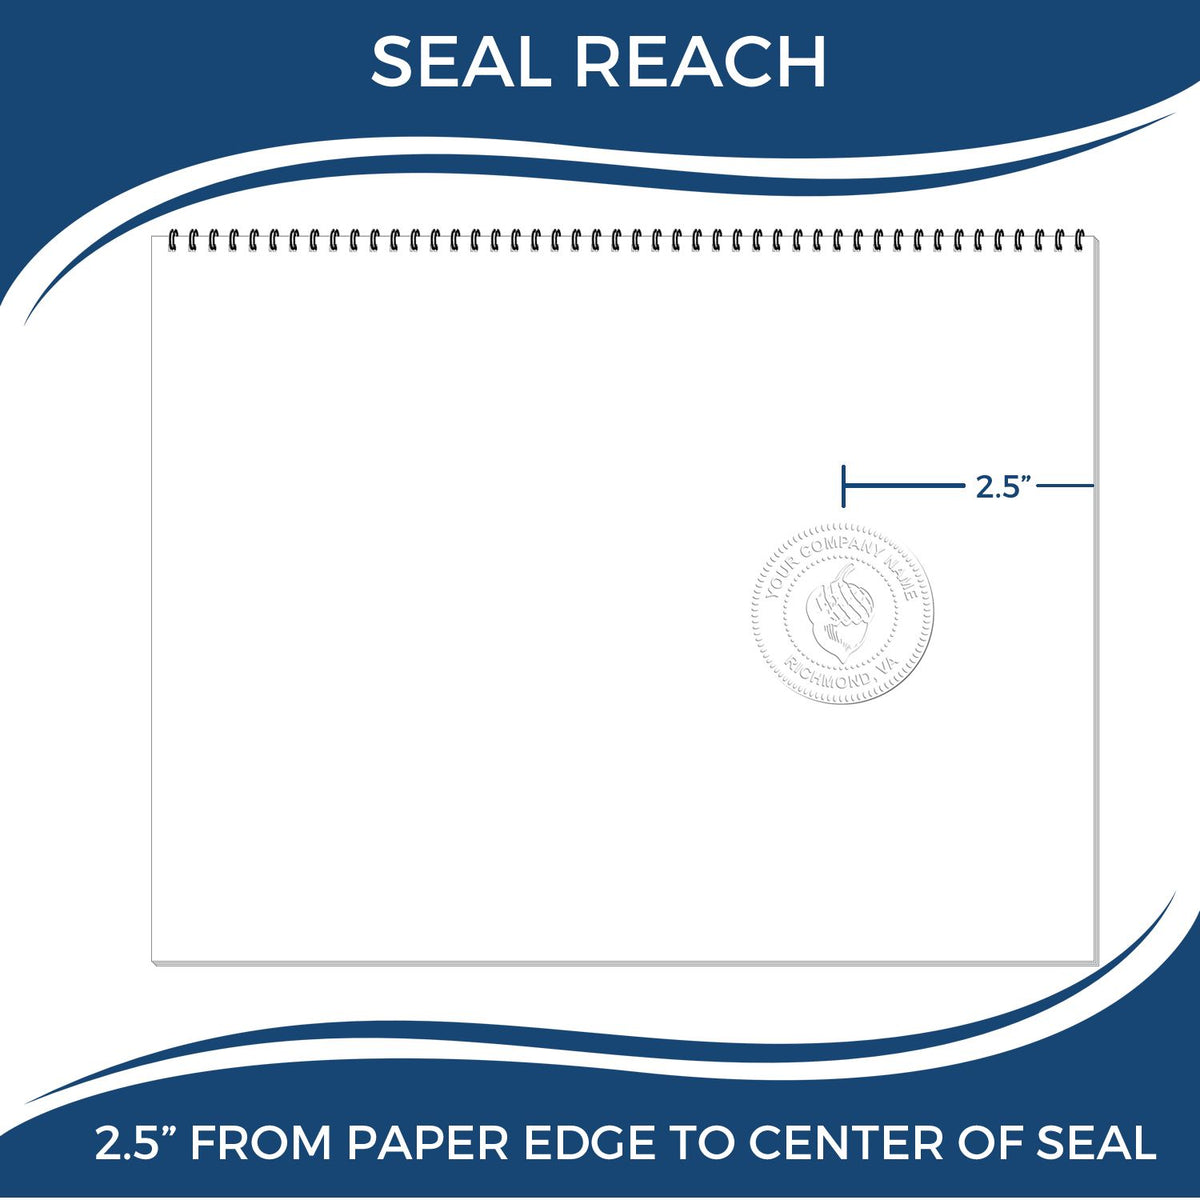 An infographic showing the seal reach which is represented by a ruler and a miniature seal image of the Heavy Duty Cast Iron Colorado Land Surveyor Seal Embosser